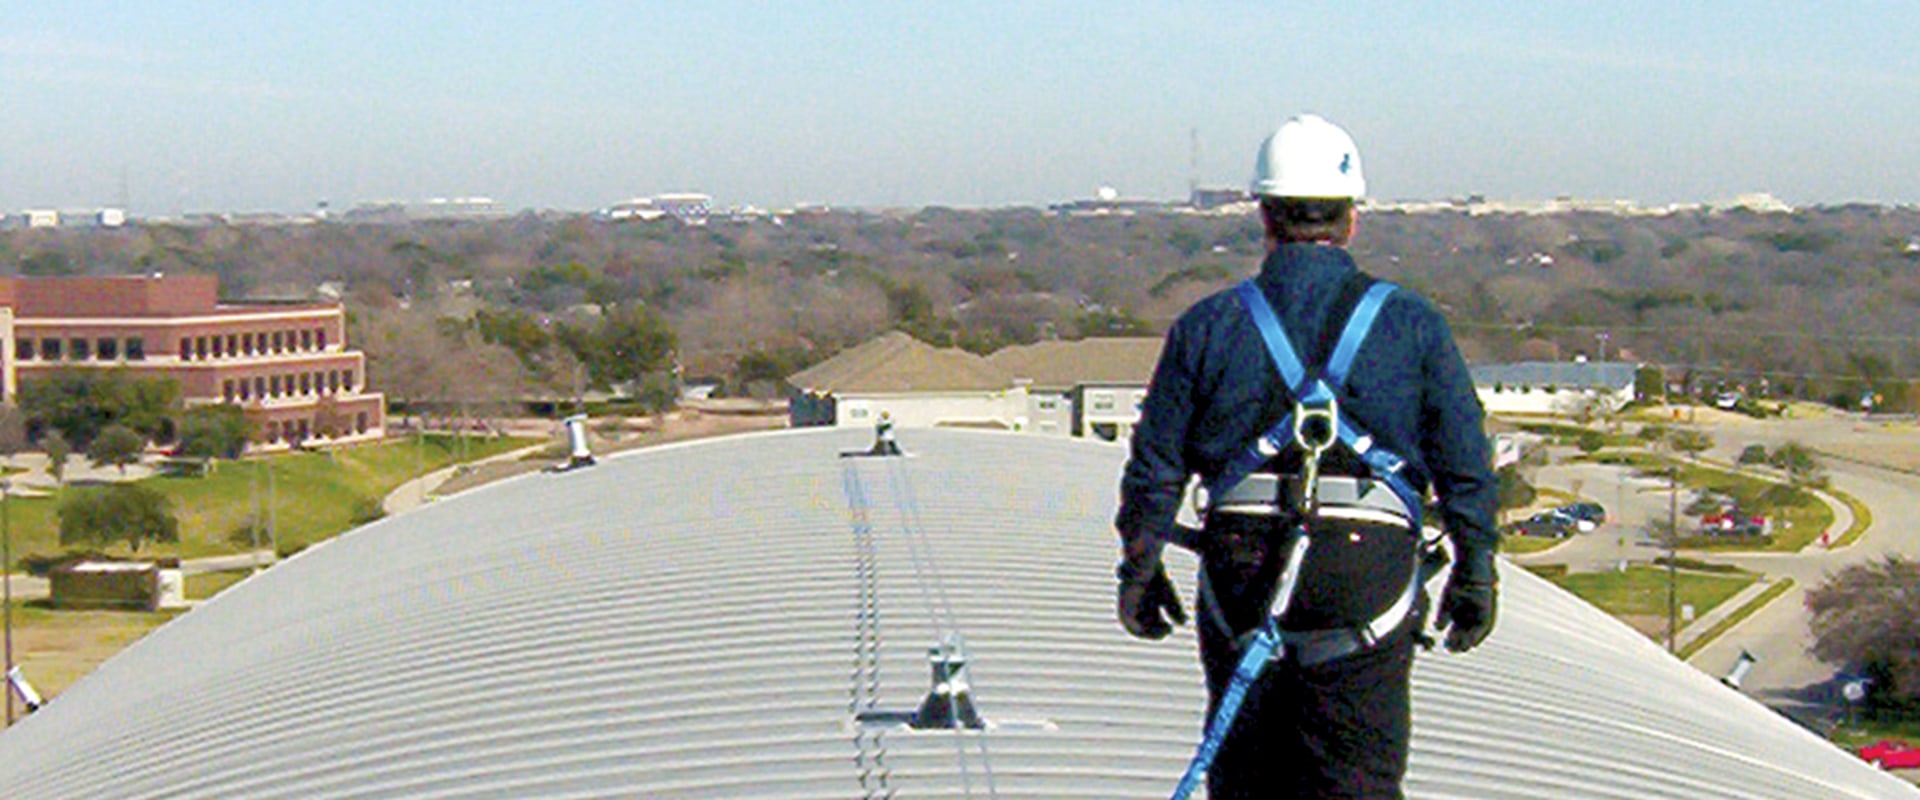 What type of fall protection do you believe should be required for roofers on residential buildings?